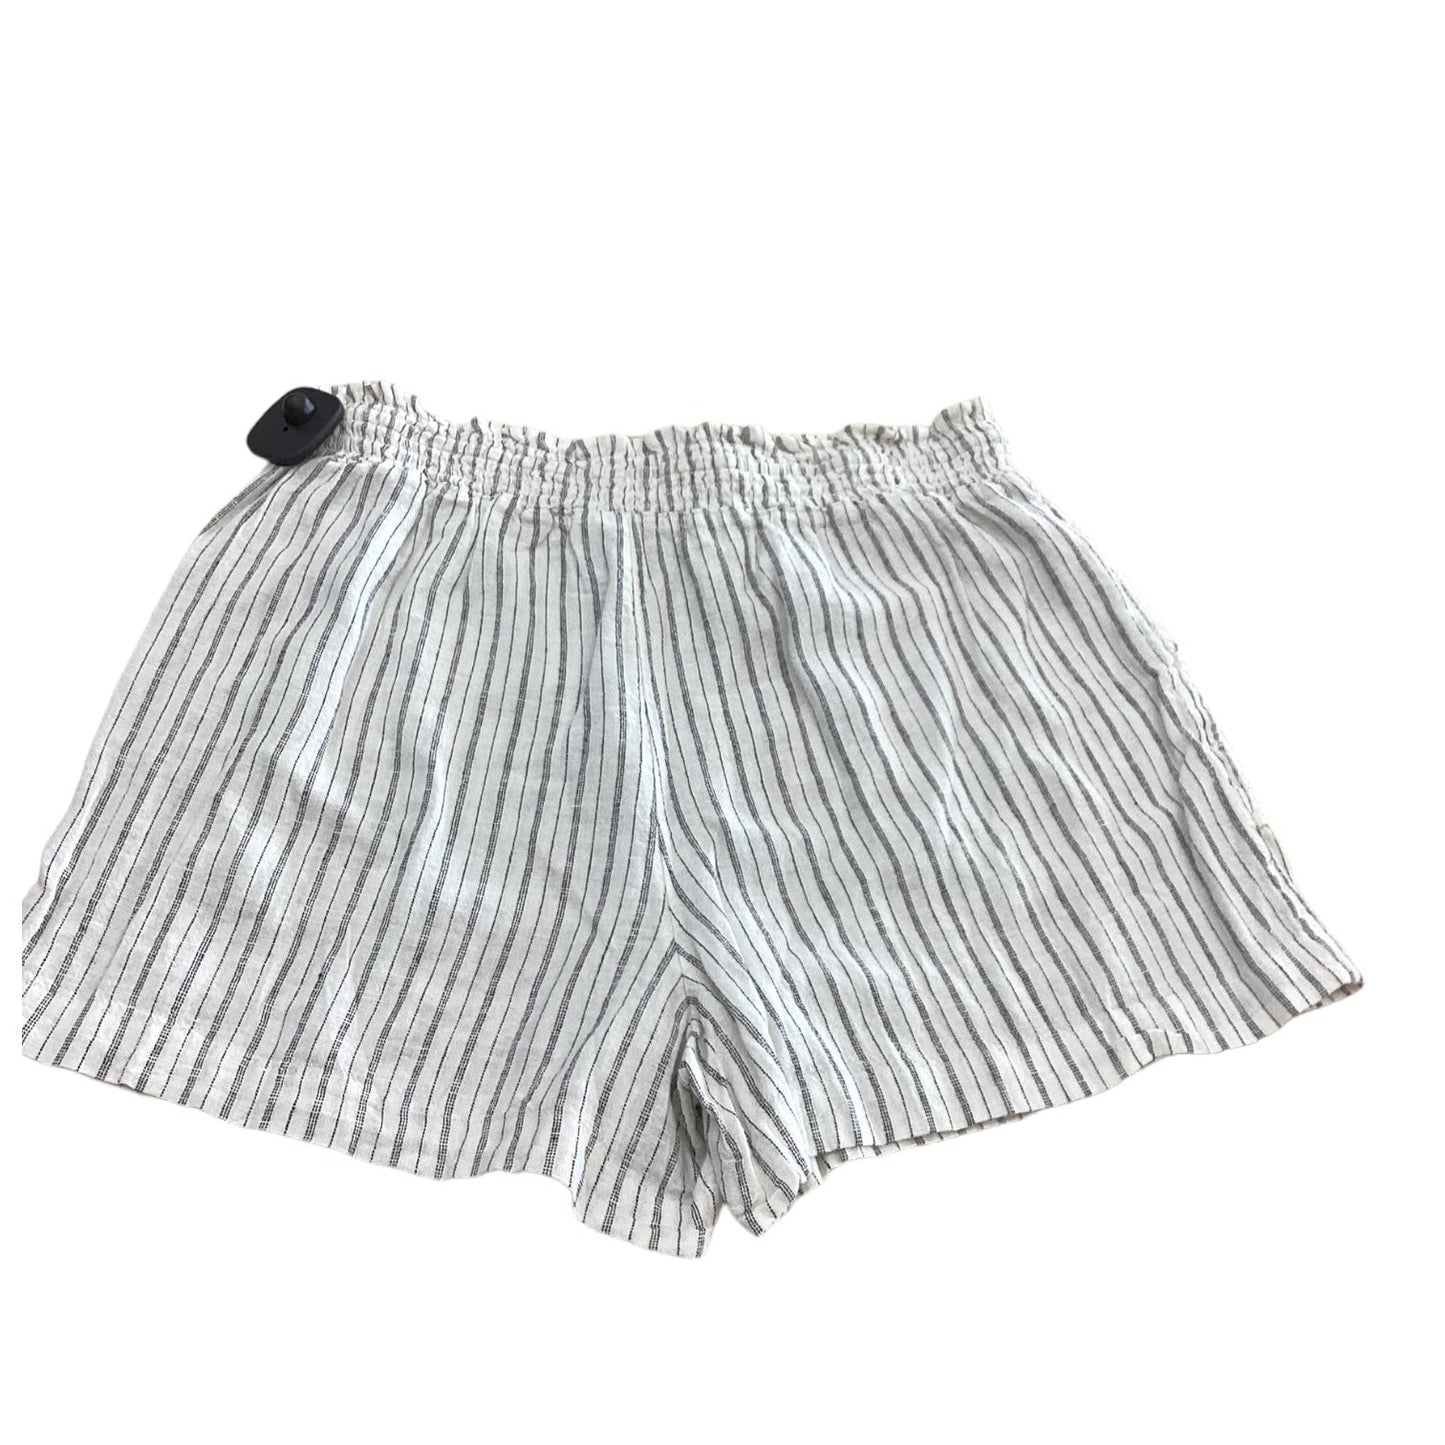 Black & White Shorts Time And Tru, Size M